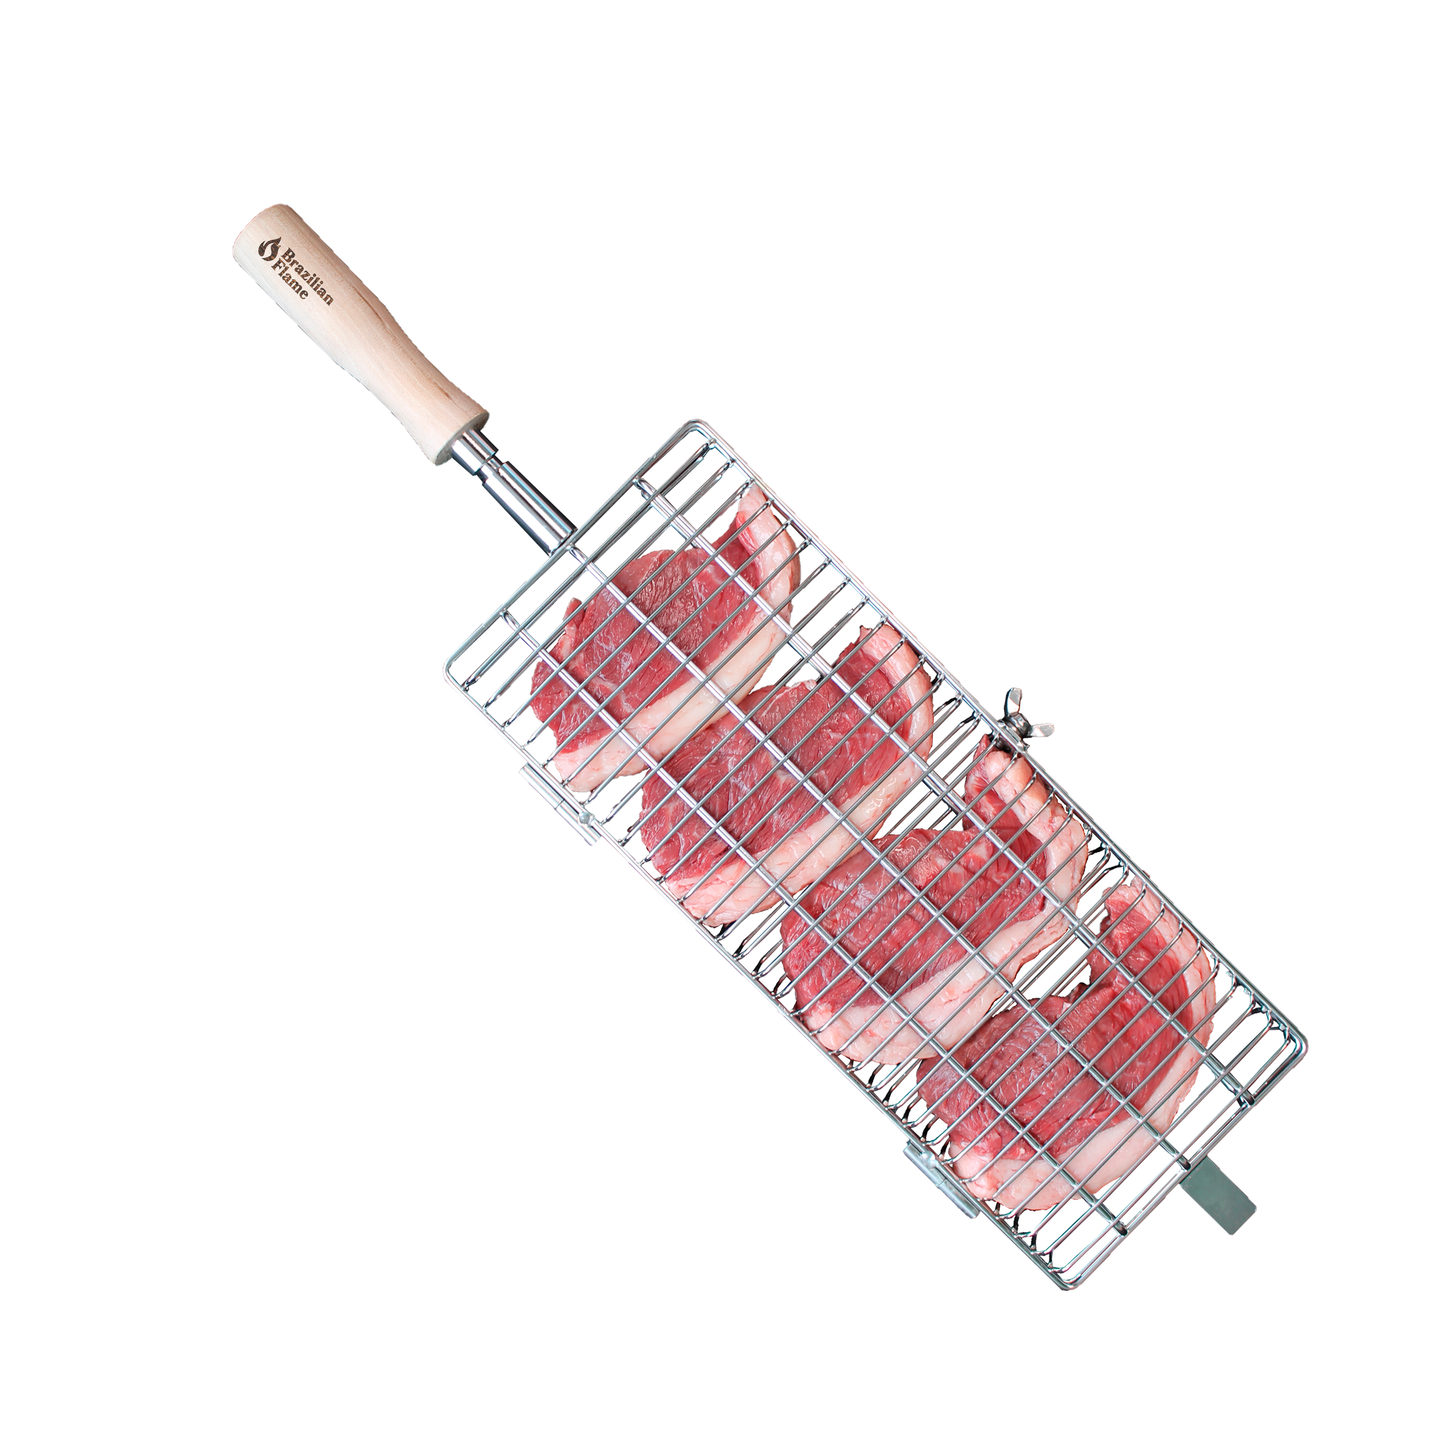 Brazilian Flame Flat Rotisserie Grill Basket - Beef & Poultry